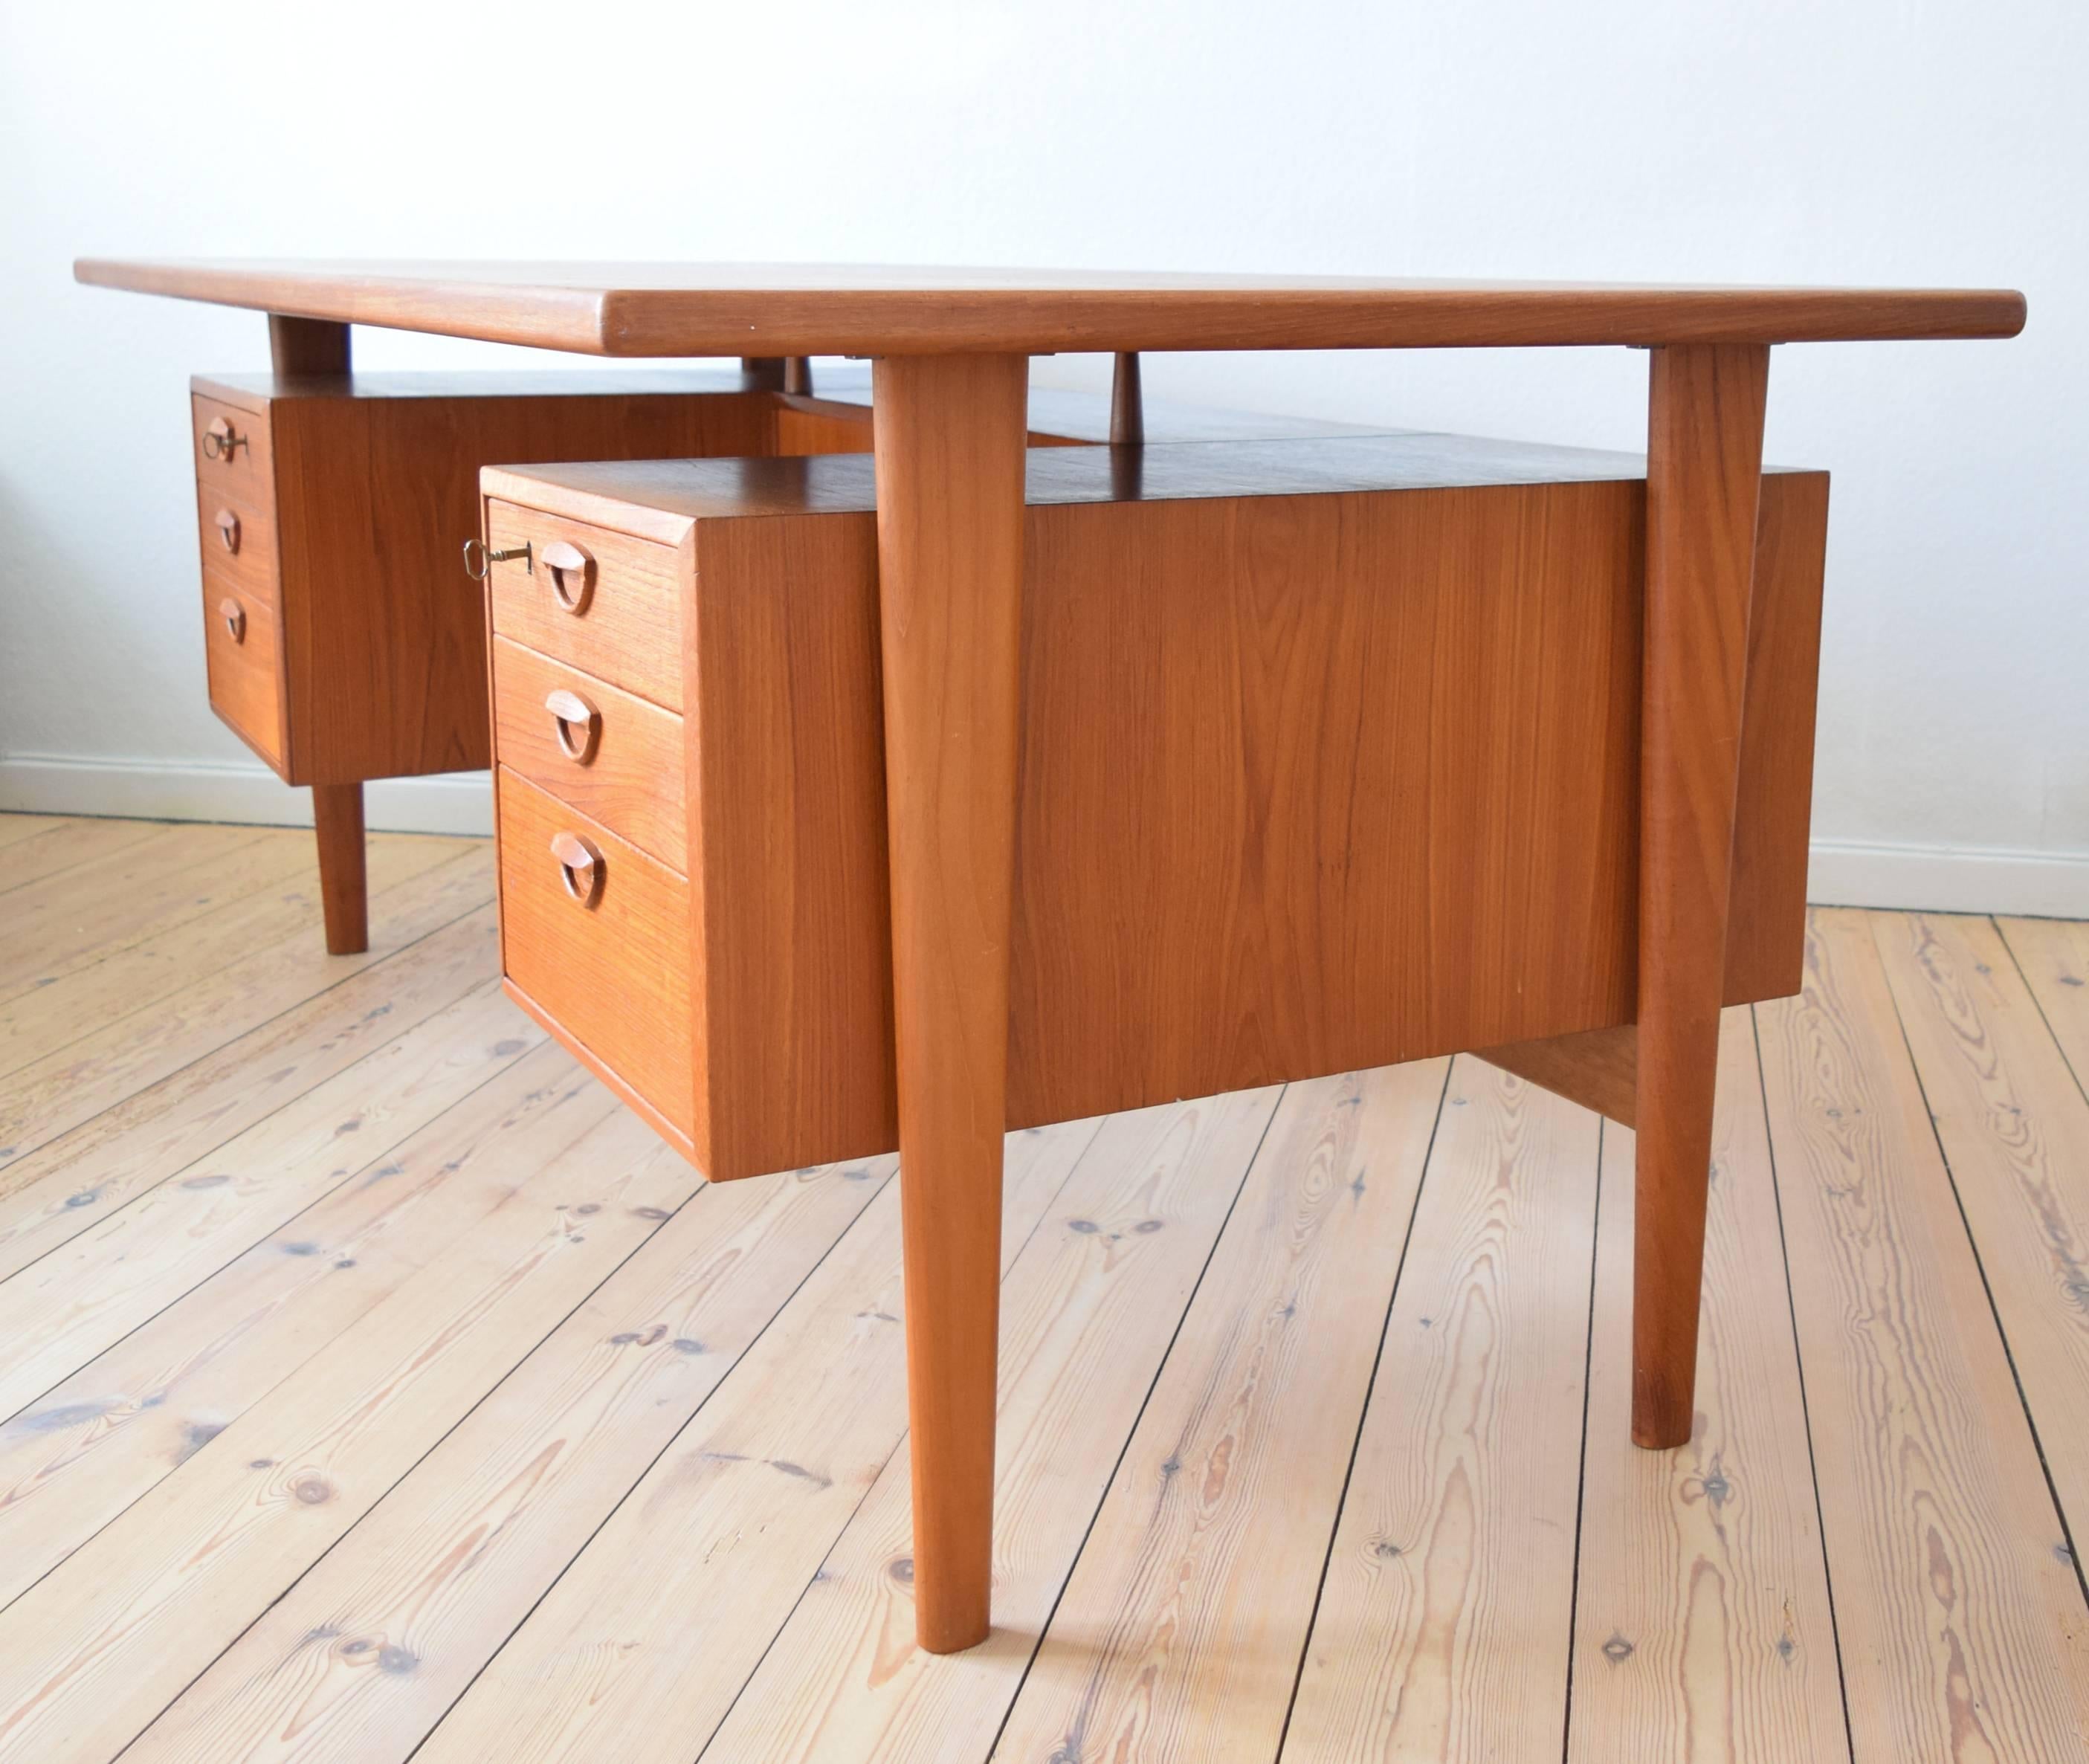 This is one of the largest desks designed by Kai Kristiansen and has a total width of 179 cm. Manufactured by Feldballes Møbelfabrik it features six drawers on the front and on the back, two lockable bar sections plus bookshelf. The desk has been